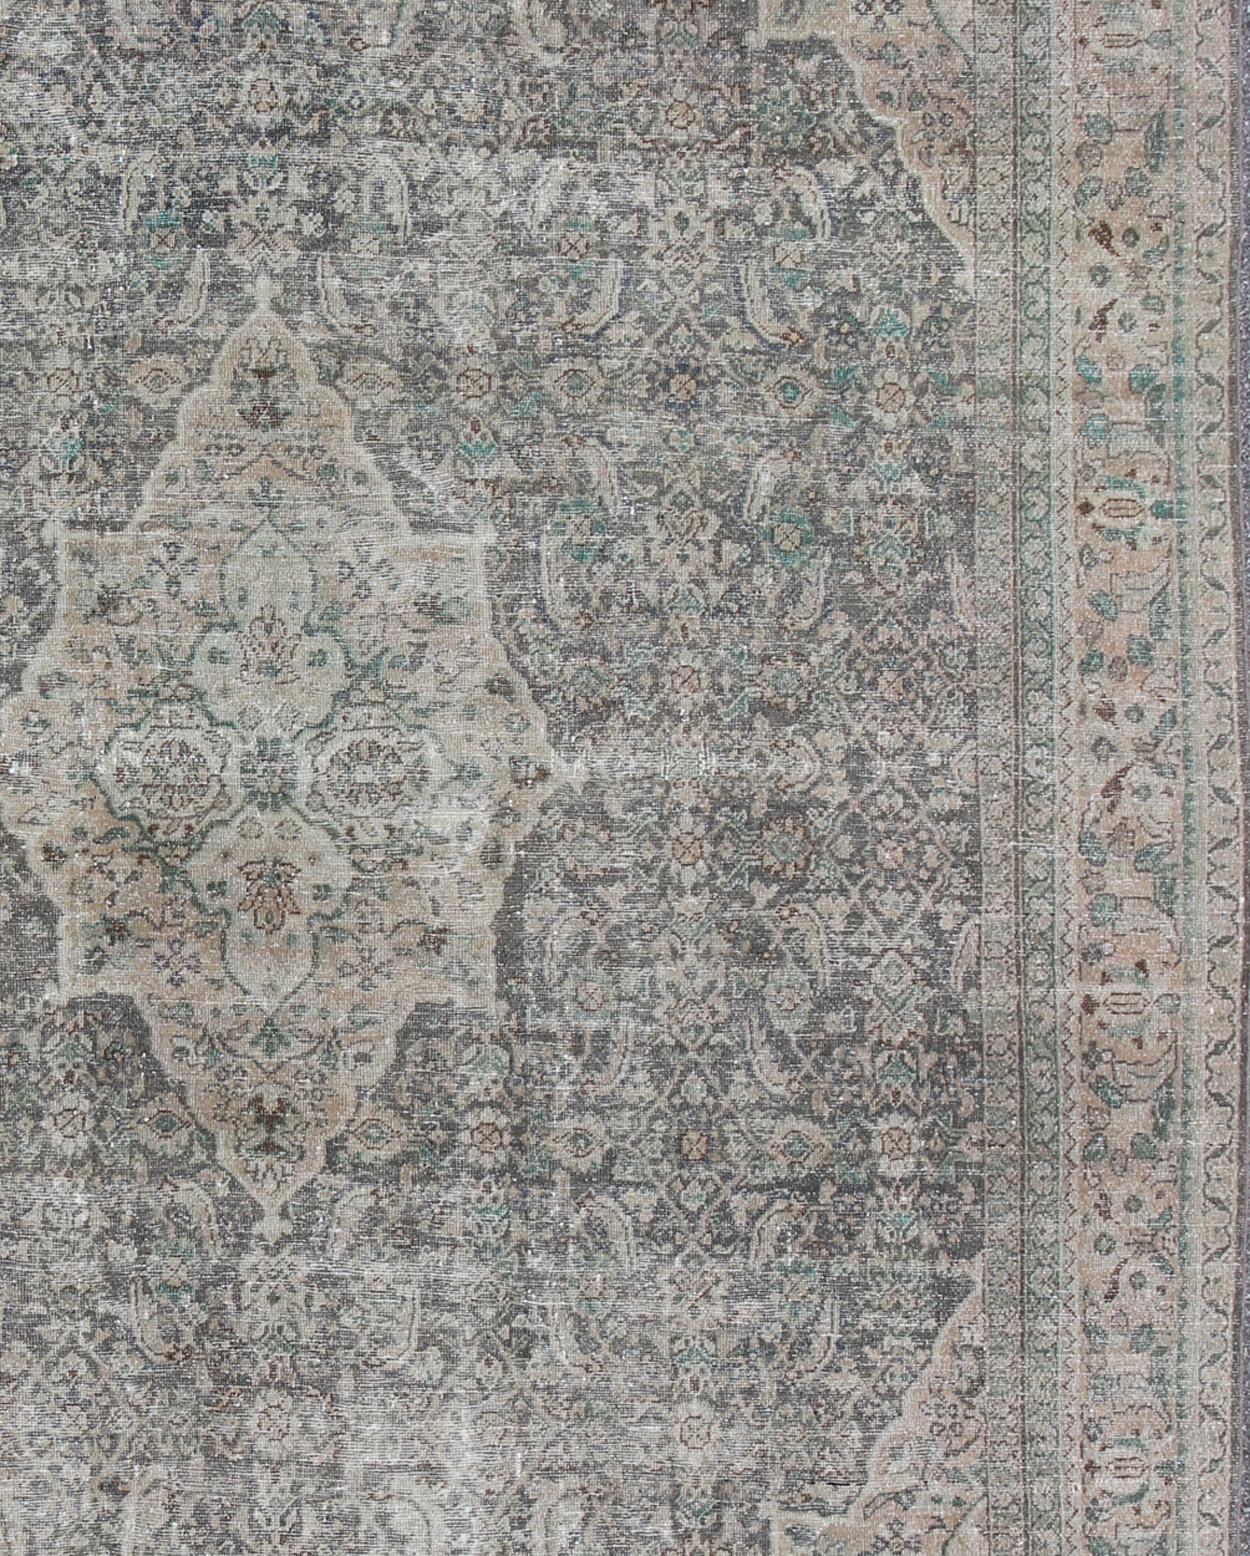 Hand-Knotted Antique Distressed Persian Mahal/Sultanabad Rug in Light Gray, Blush/Pink For Sale